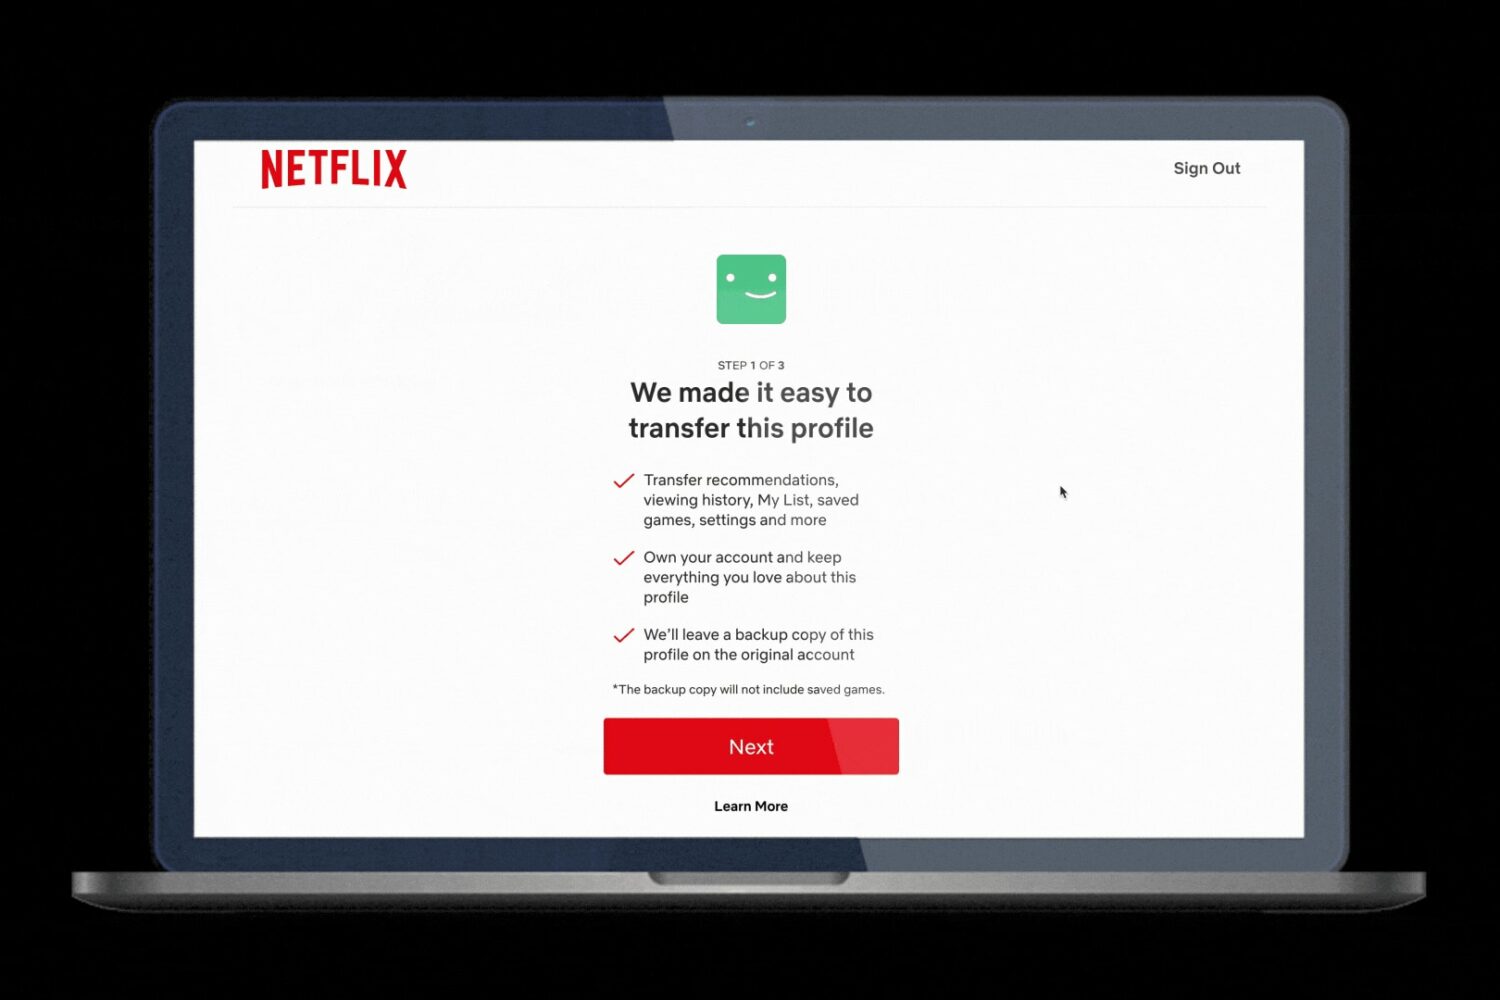 Splash screen for the Transfer Profile feature on Netflix laying out the benefits of transferring profile data to a new account